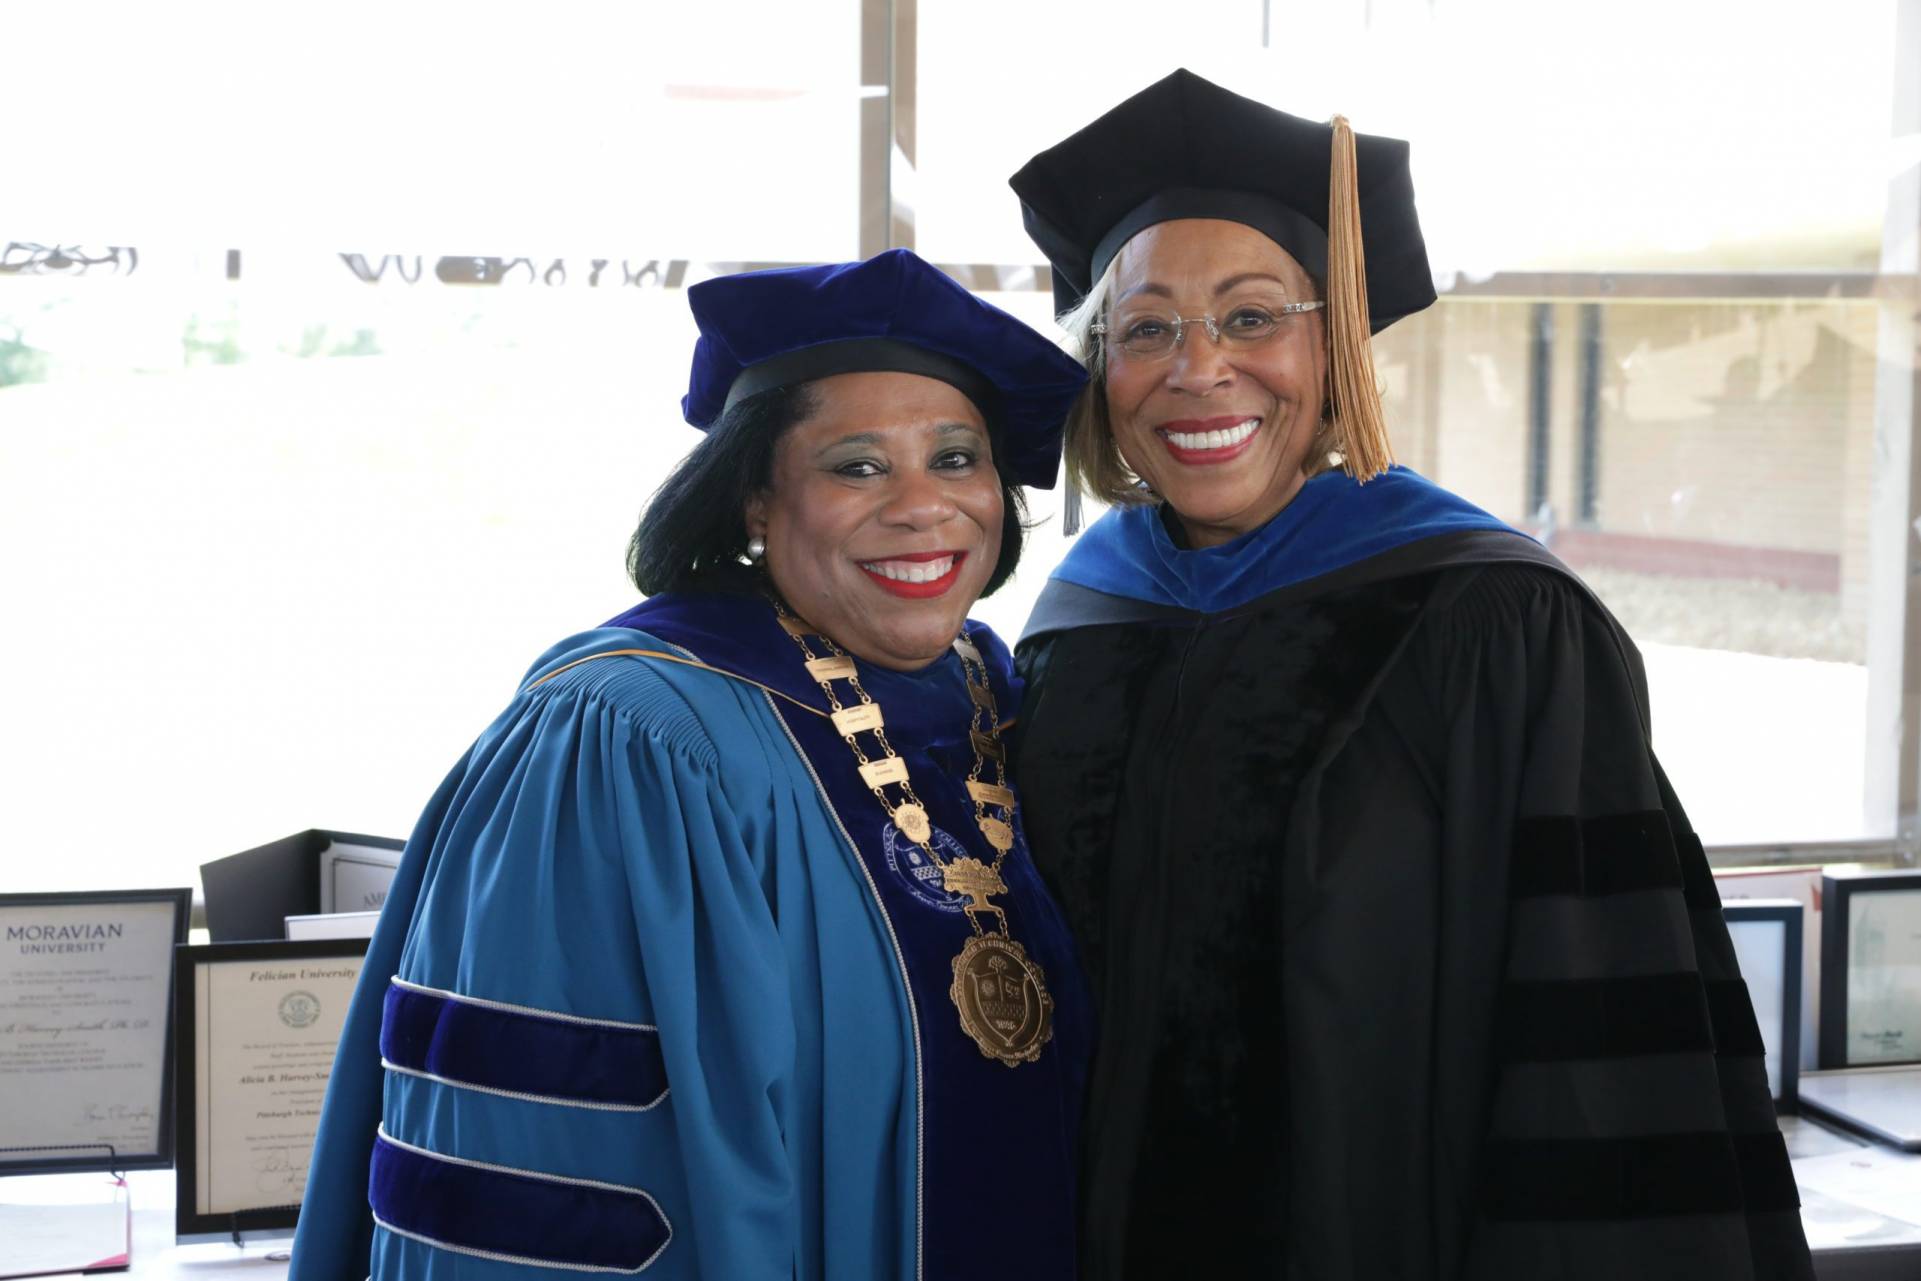 A photo of Dr. Harvey-Smith posing with a guest from the Installation Ceremony.